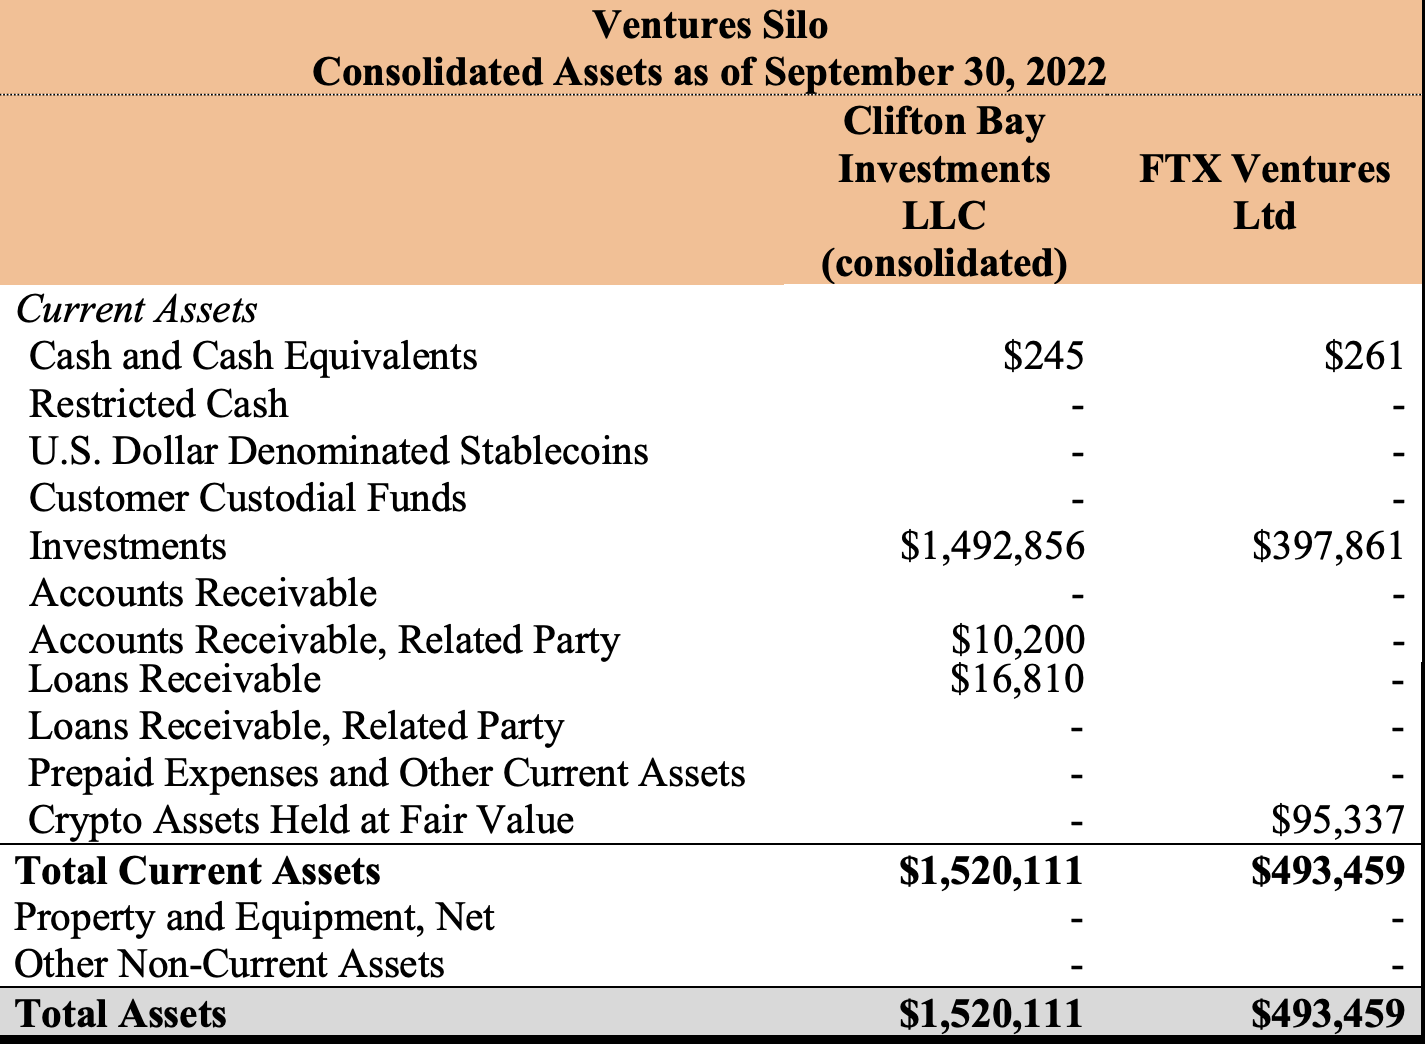 Ventures Silo - Assets as of Sep 30, 2022